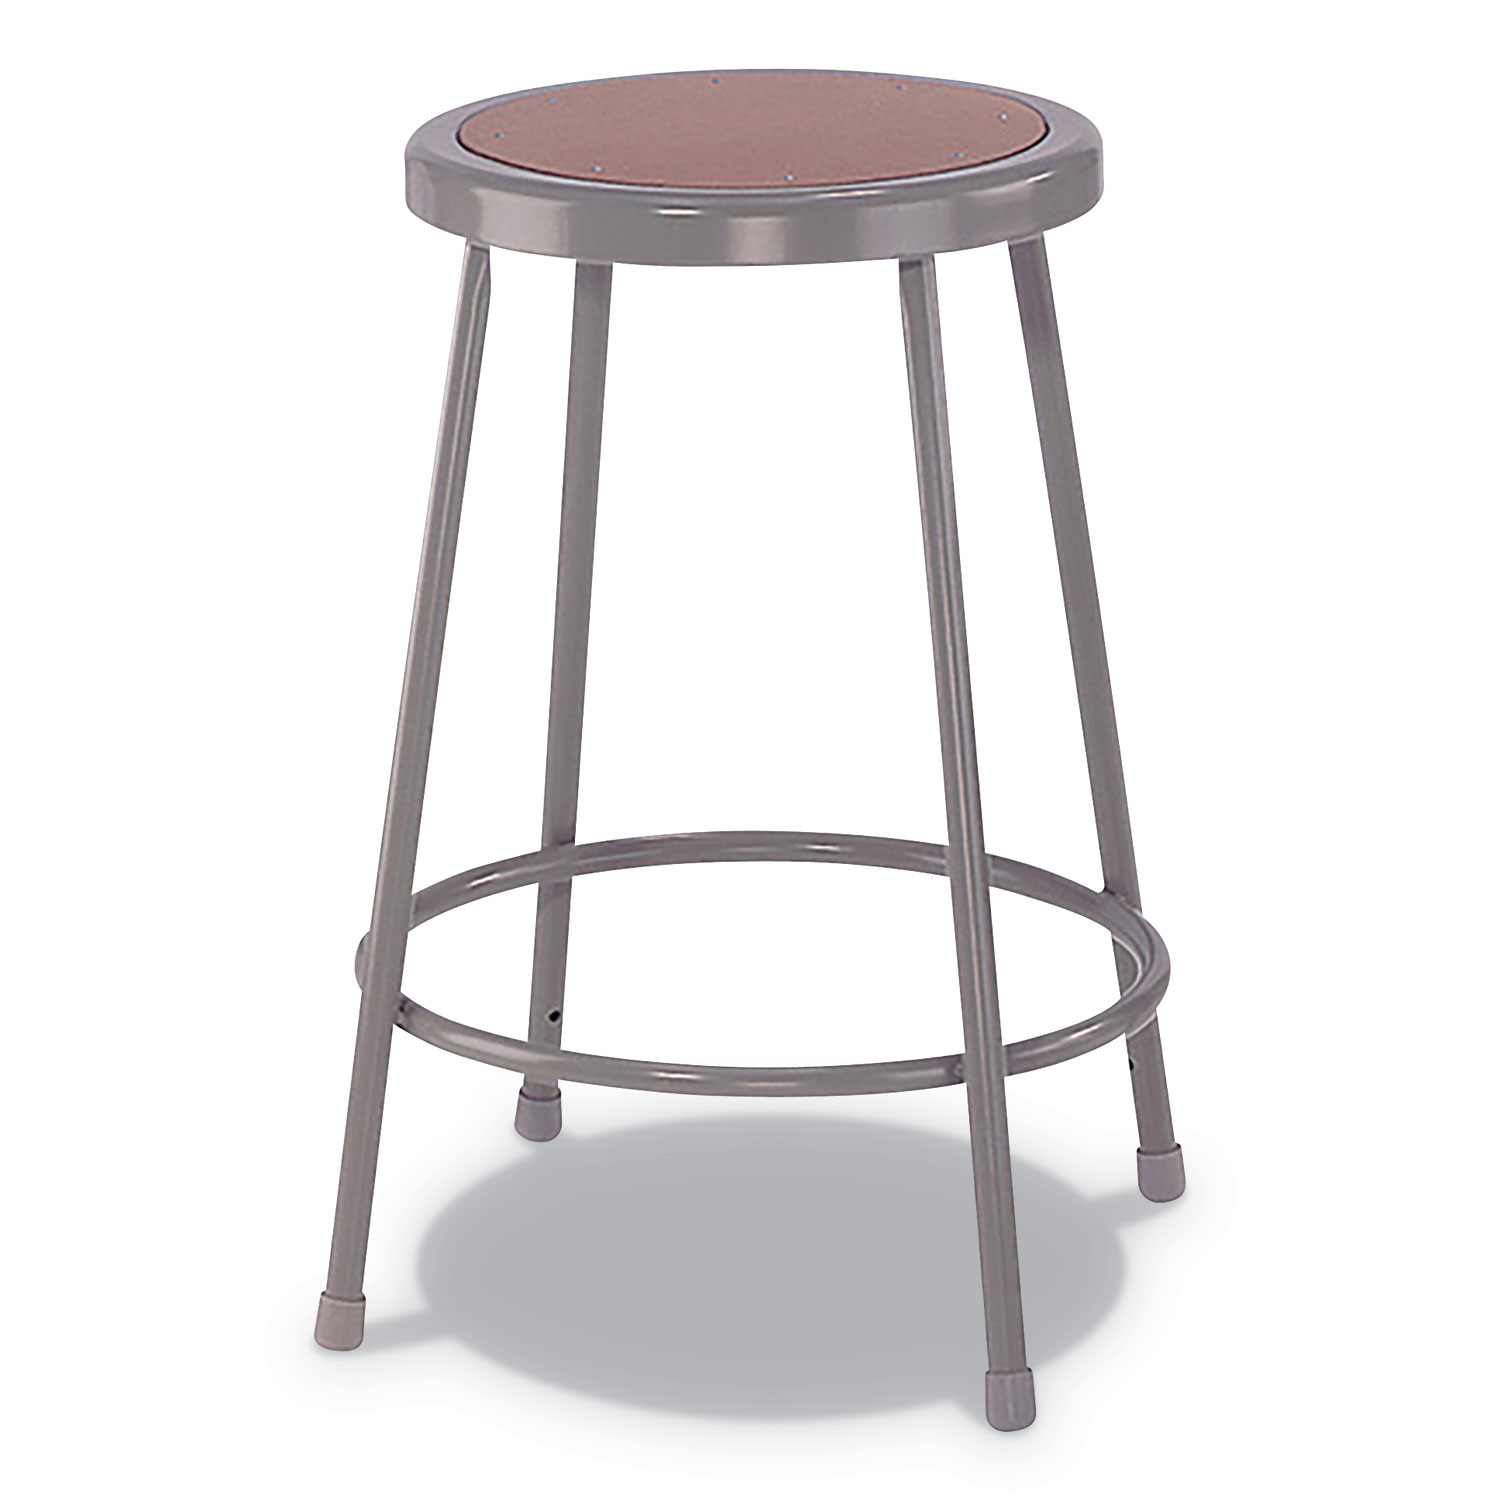  Alera ALEIS6630G Industrial Metal Shop Stool, 30 Seat Height, Supports up to 300 lbs., Brown Seat/Gray Back, Gray Base (ALEIS6630G) 